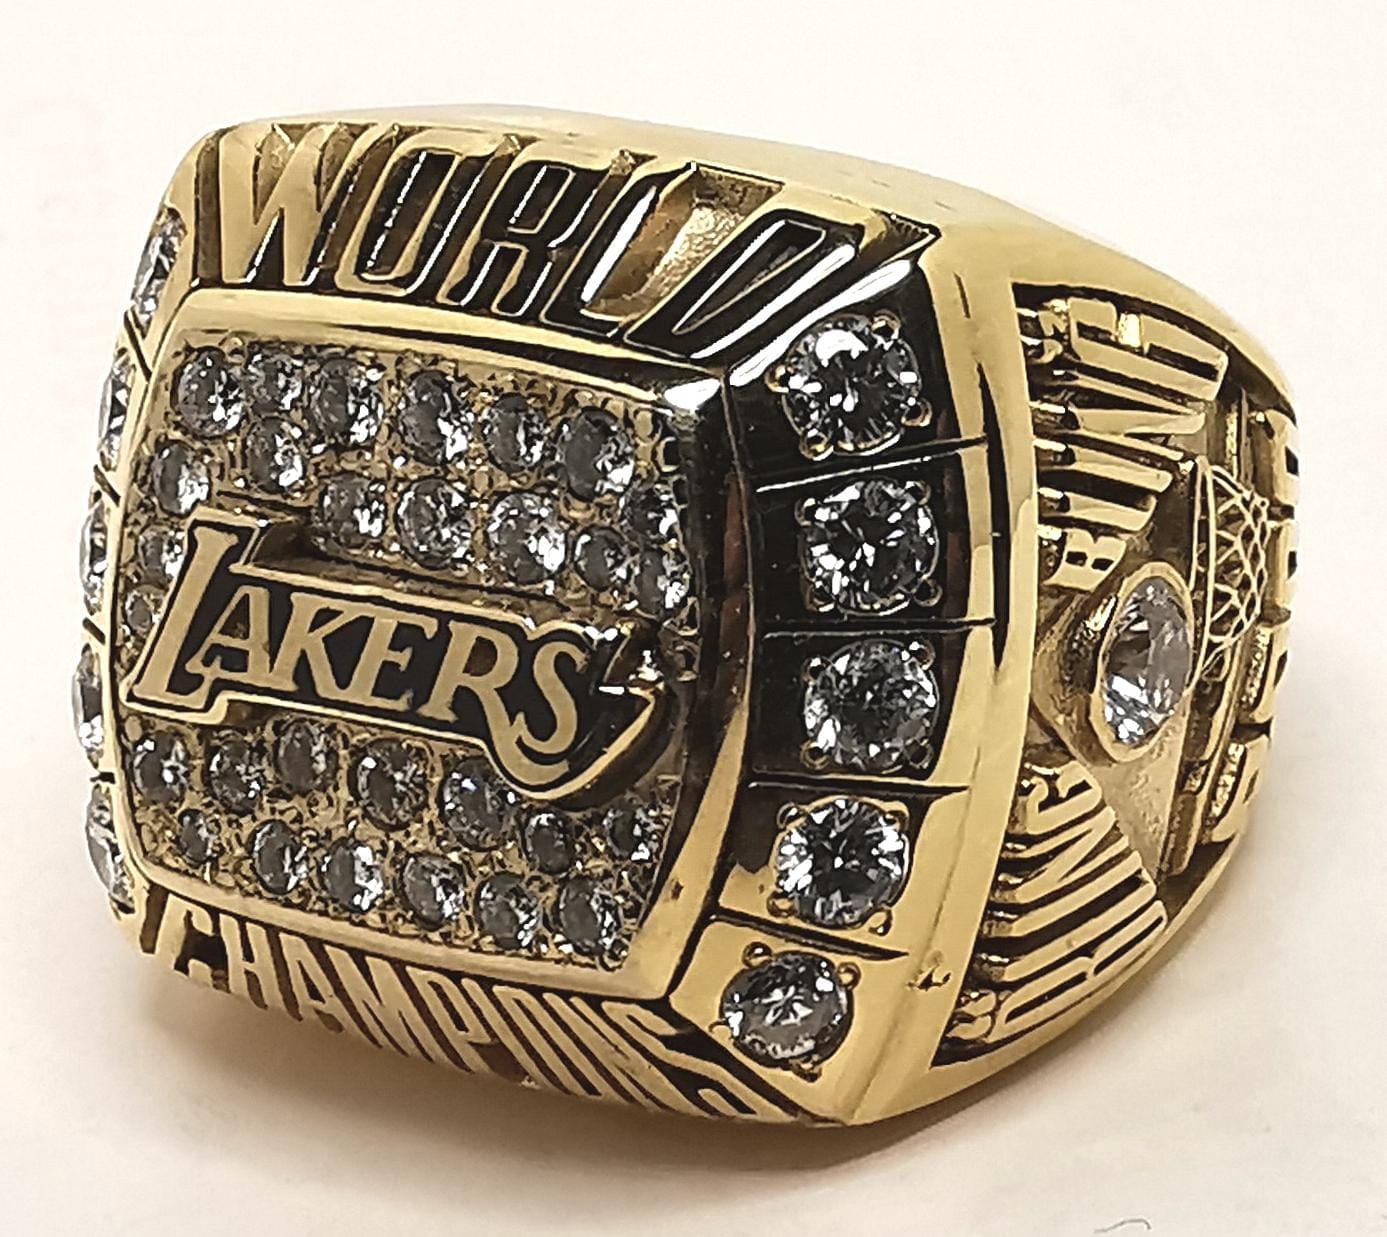 Los Angeles Lakers 2000 NBA Finals Player Ring alternate view